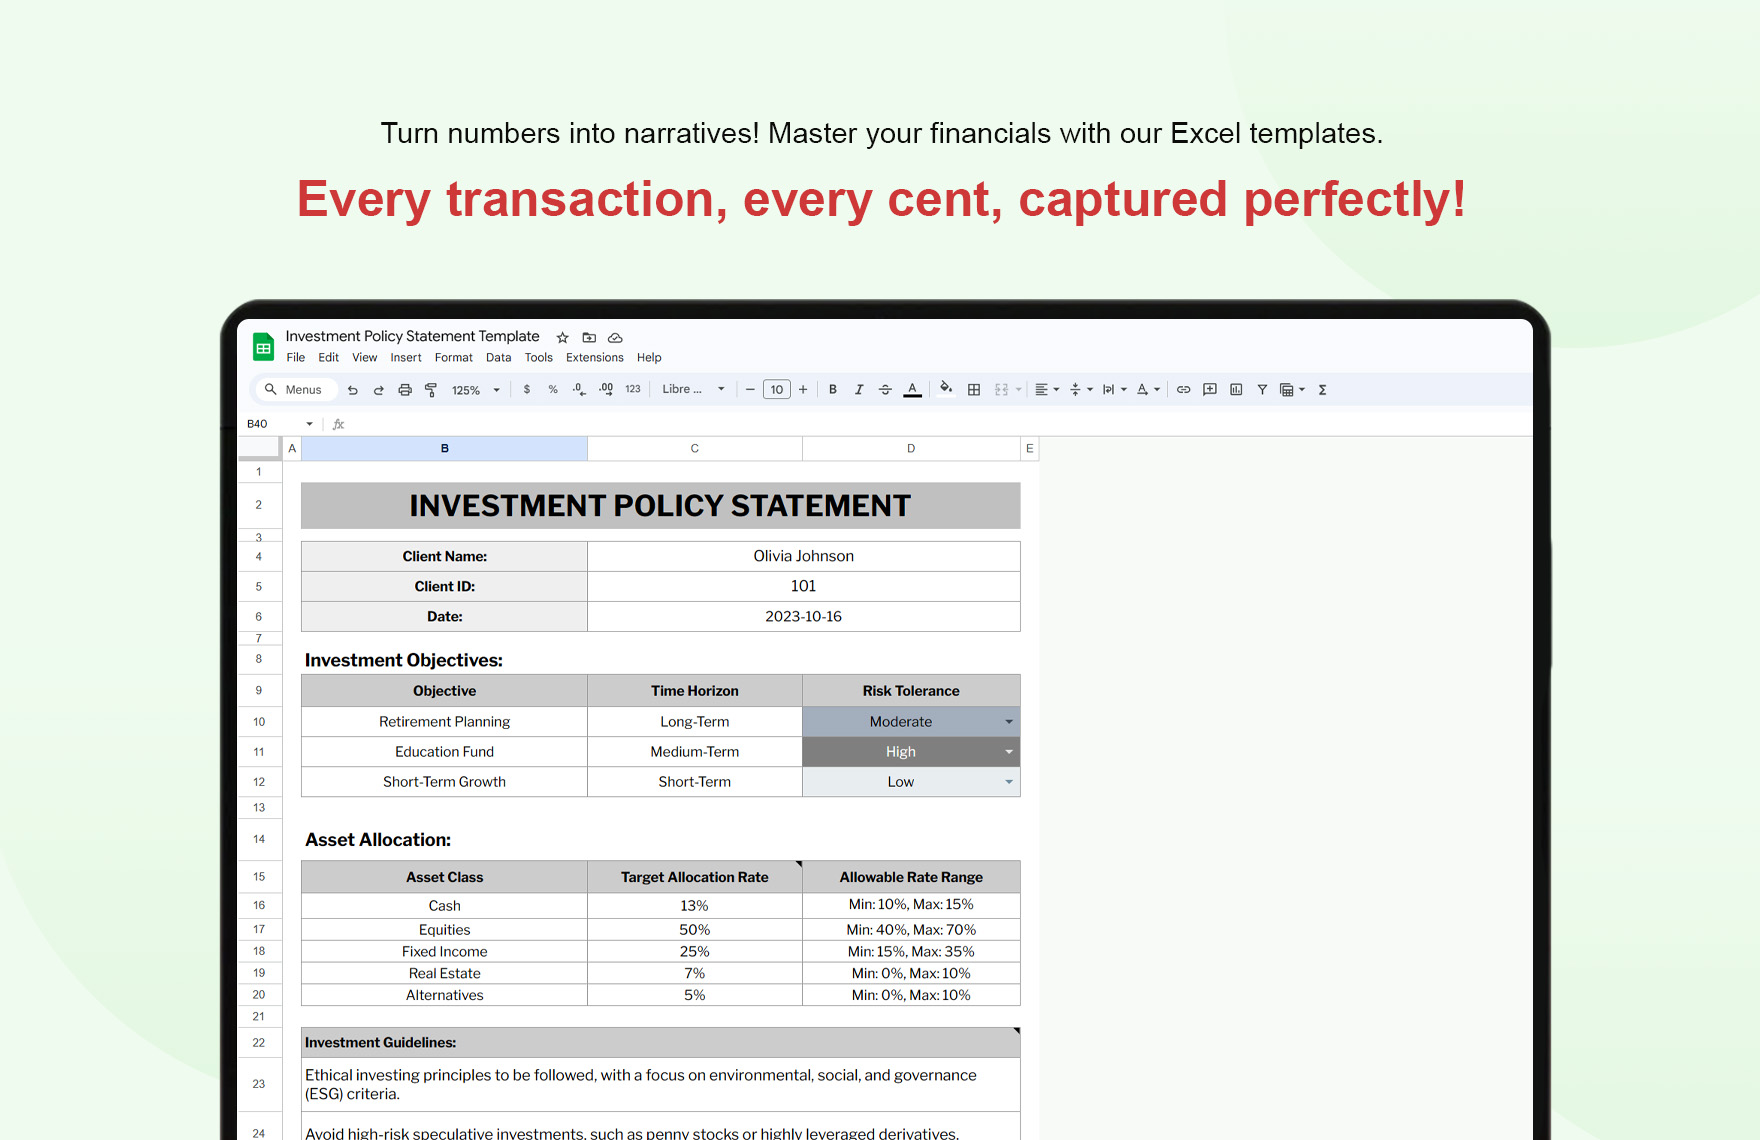 Investment Policy Statement Template